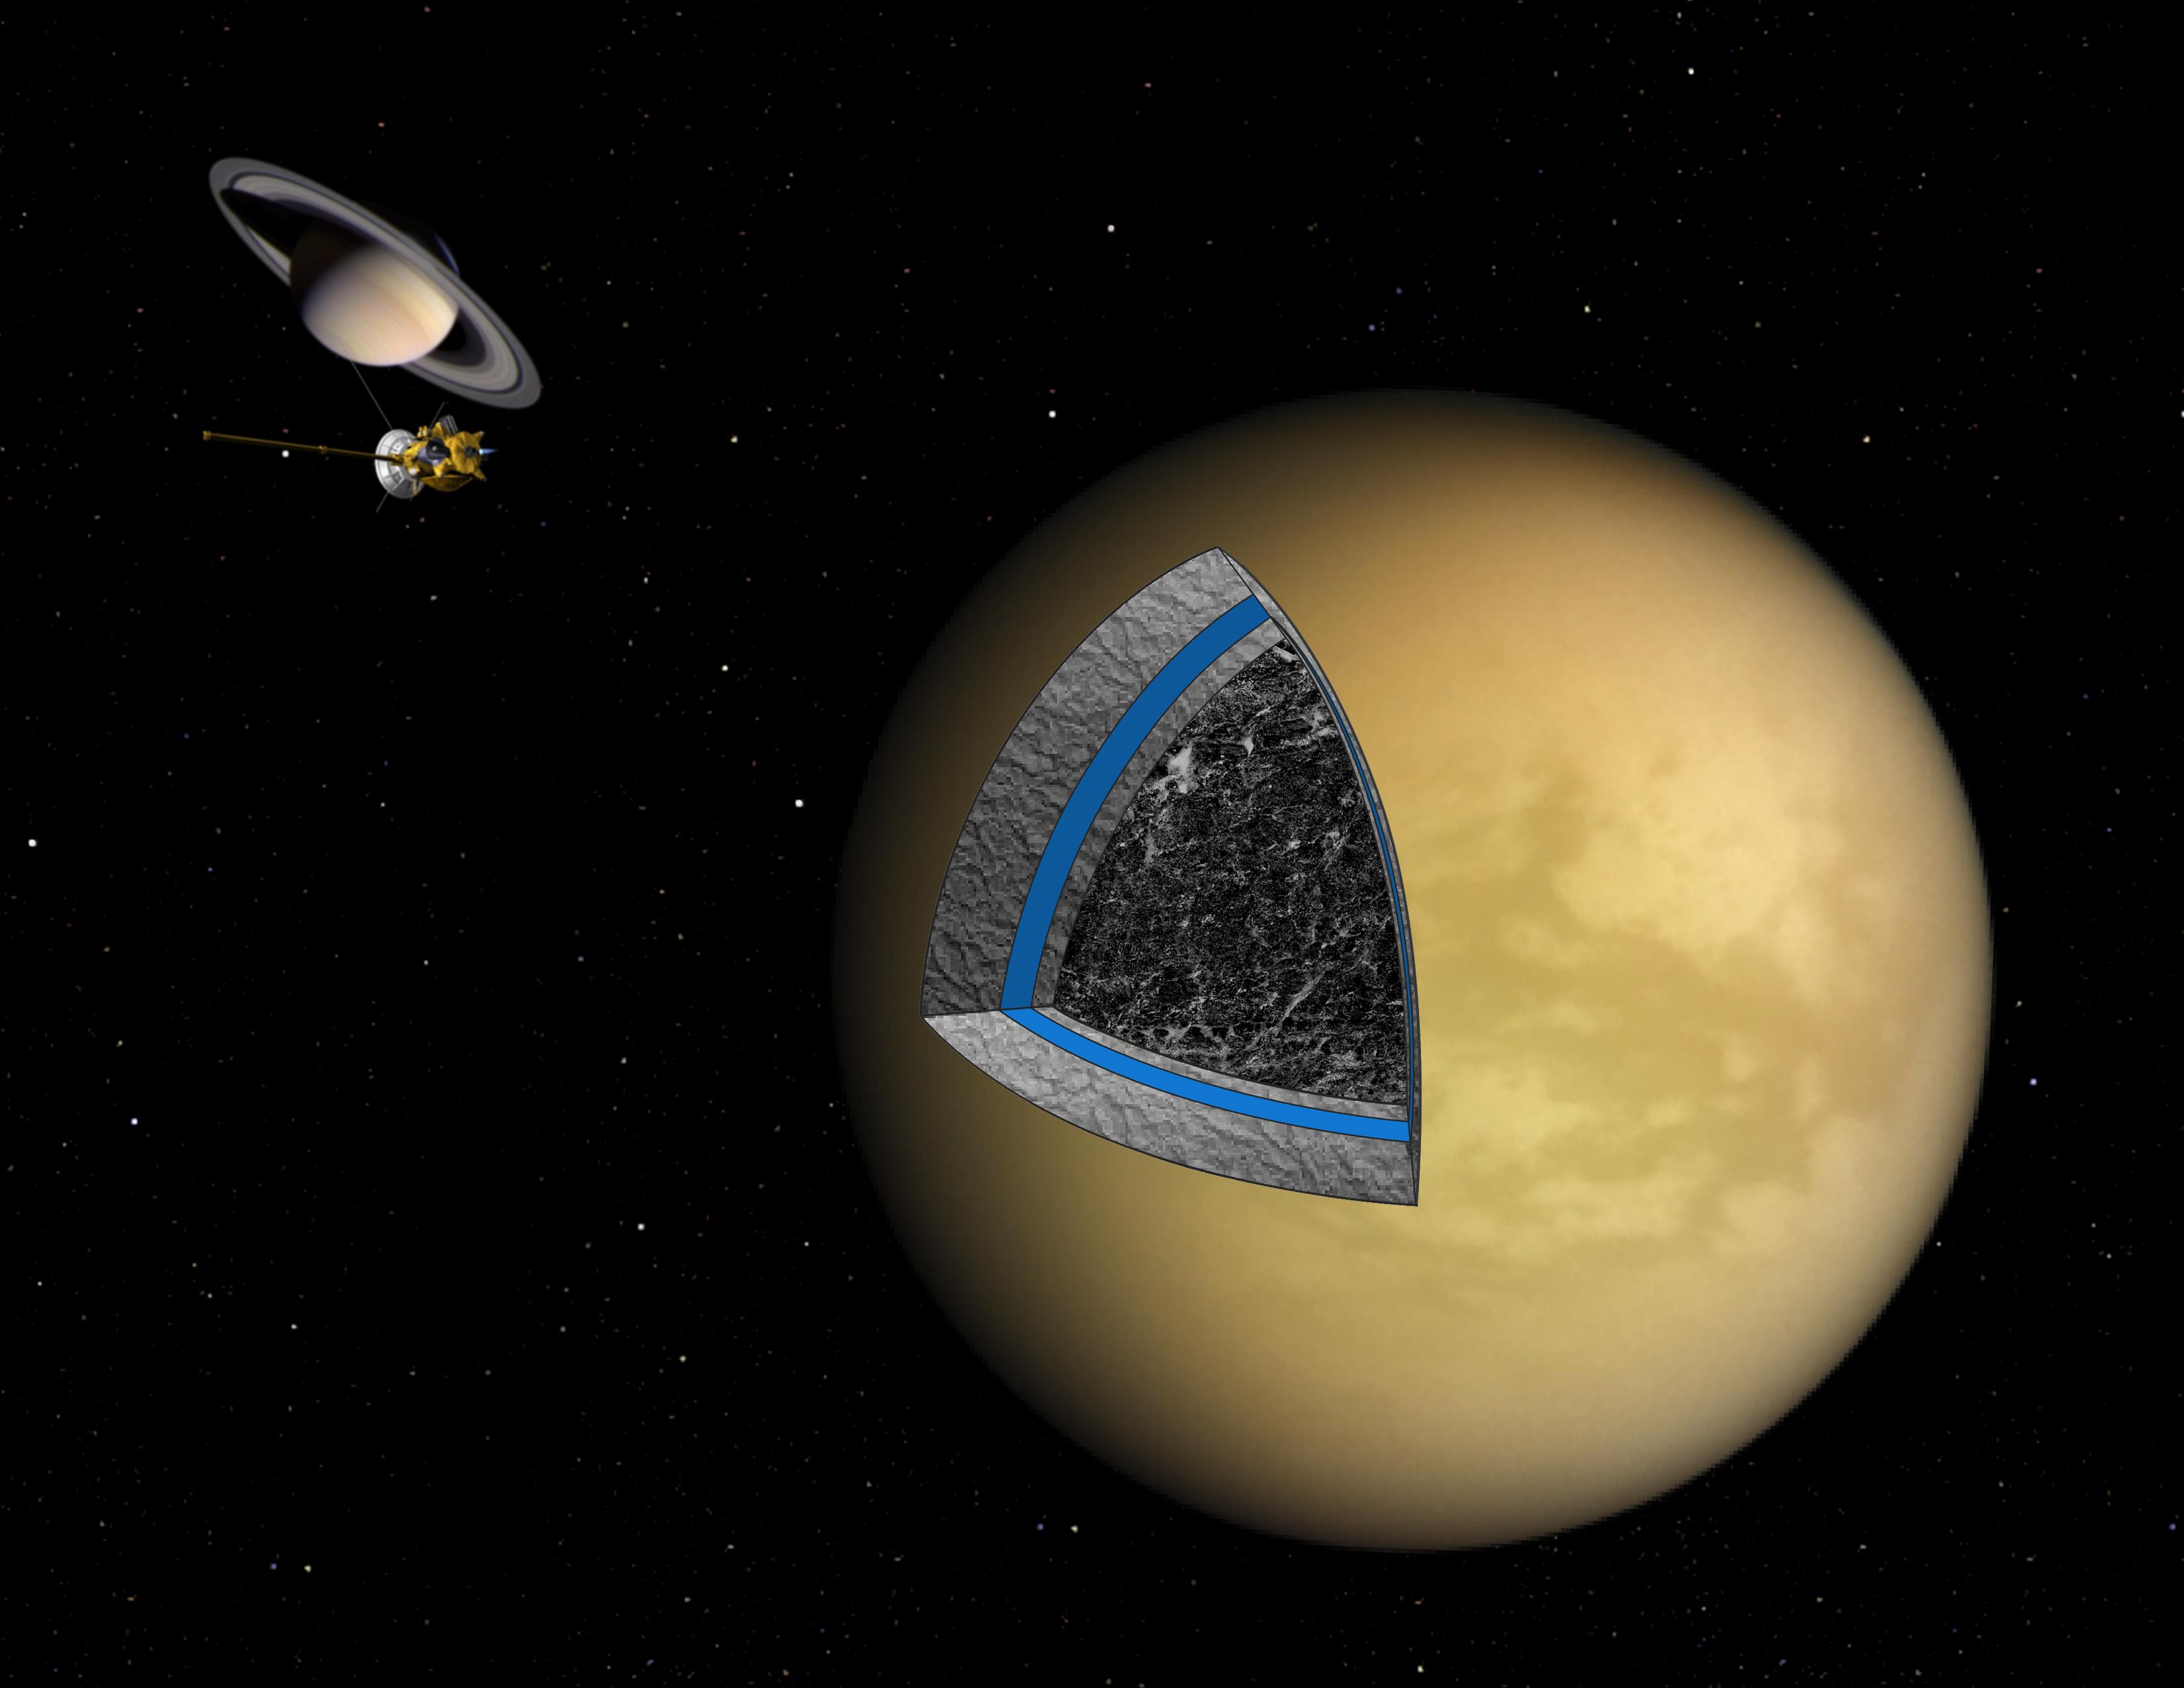 Artist's illustration of the likely interior structure of Titan